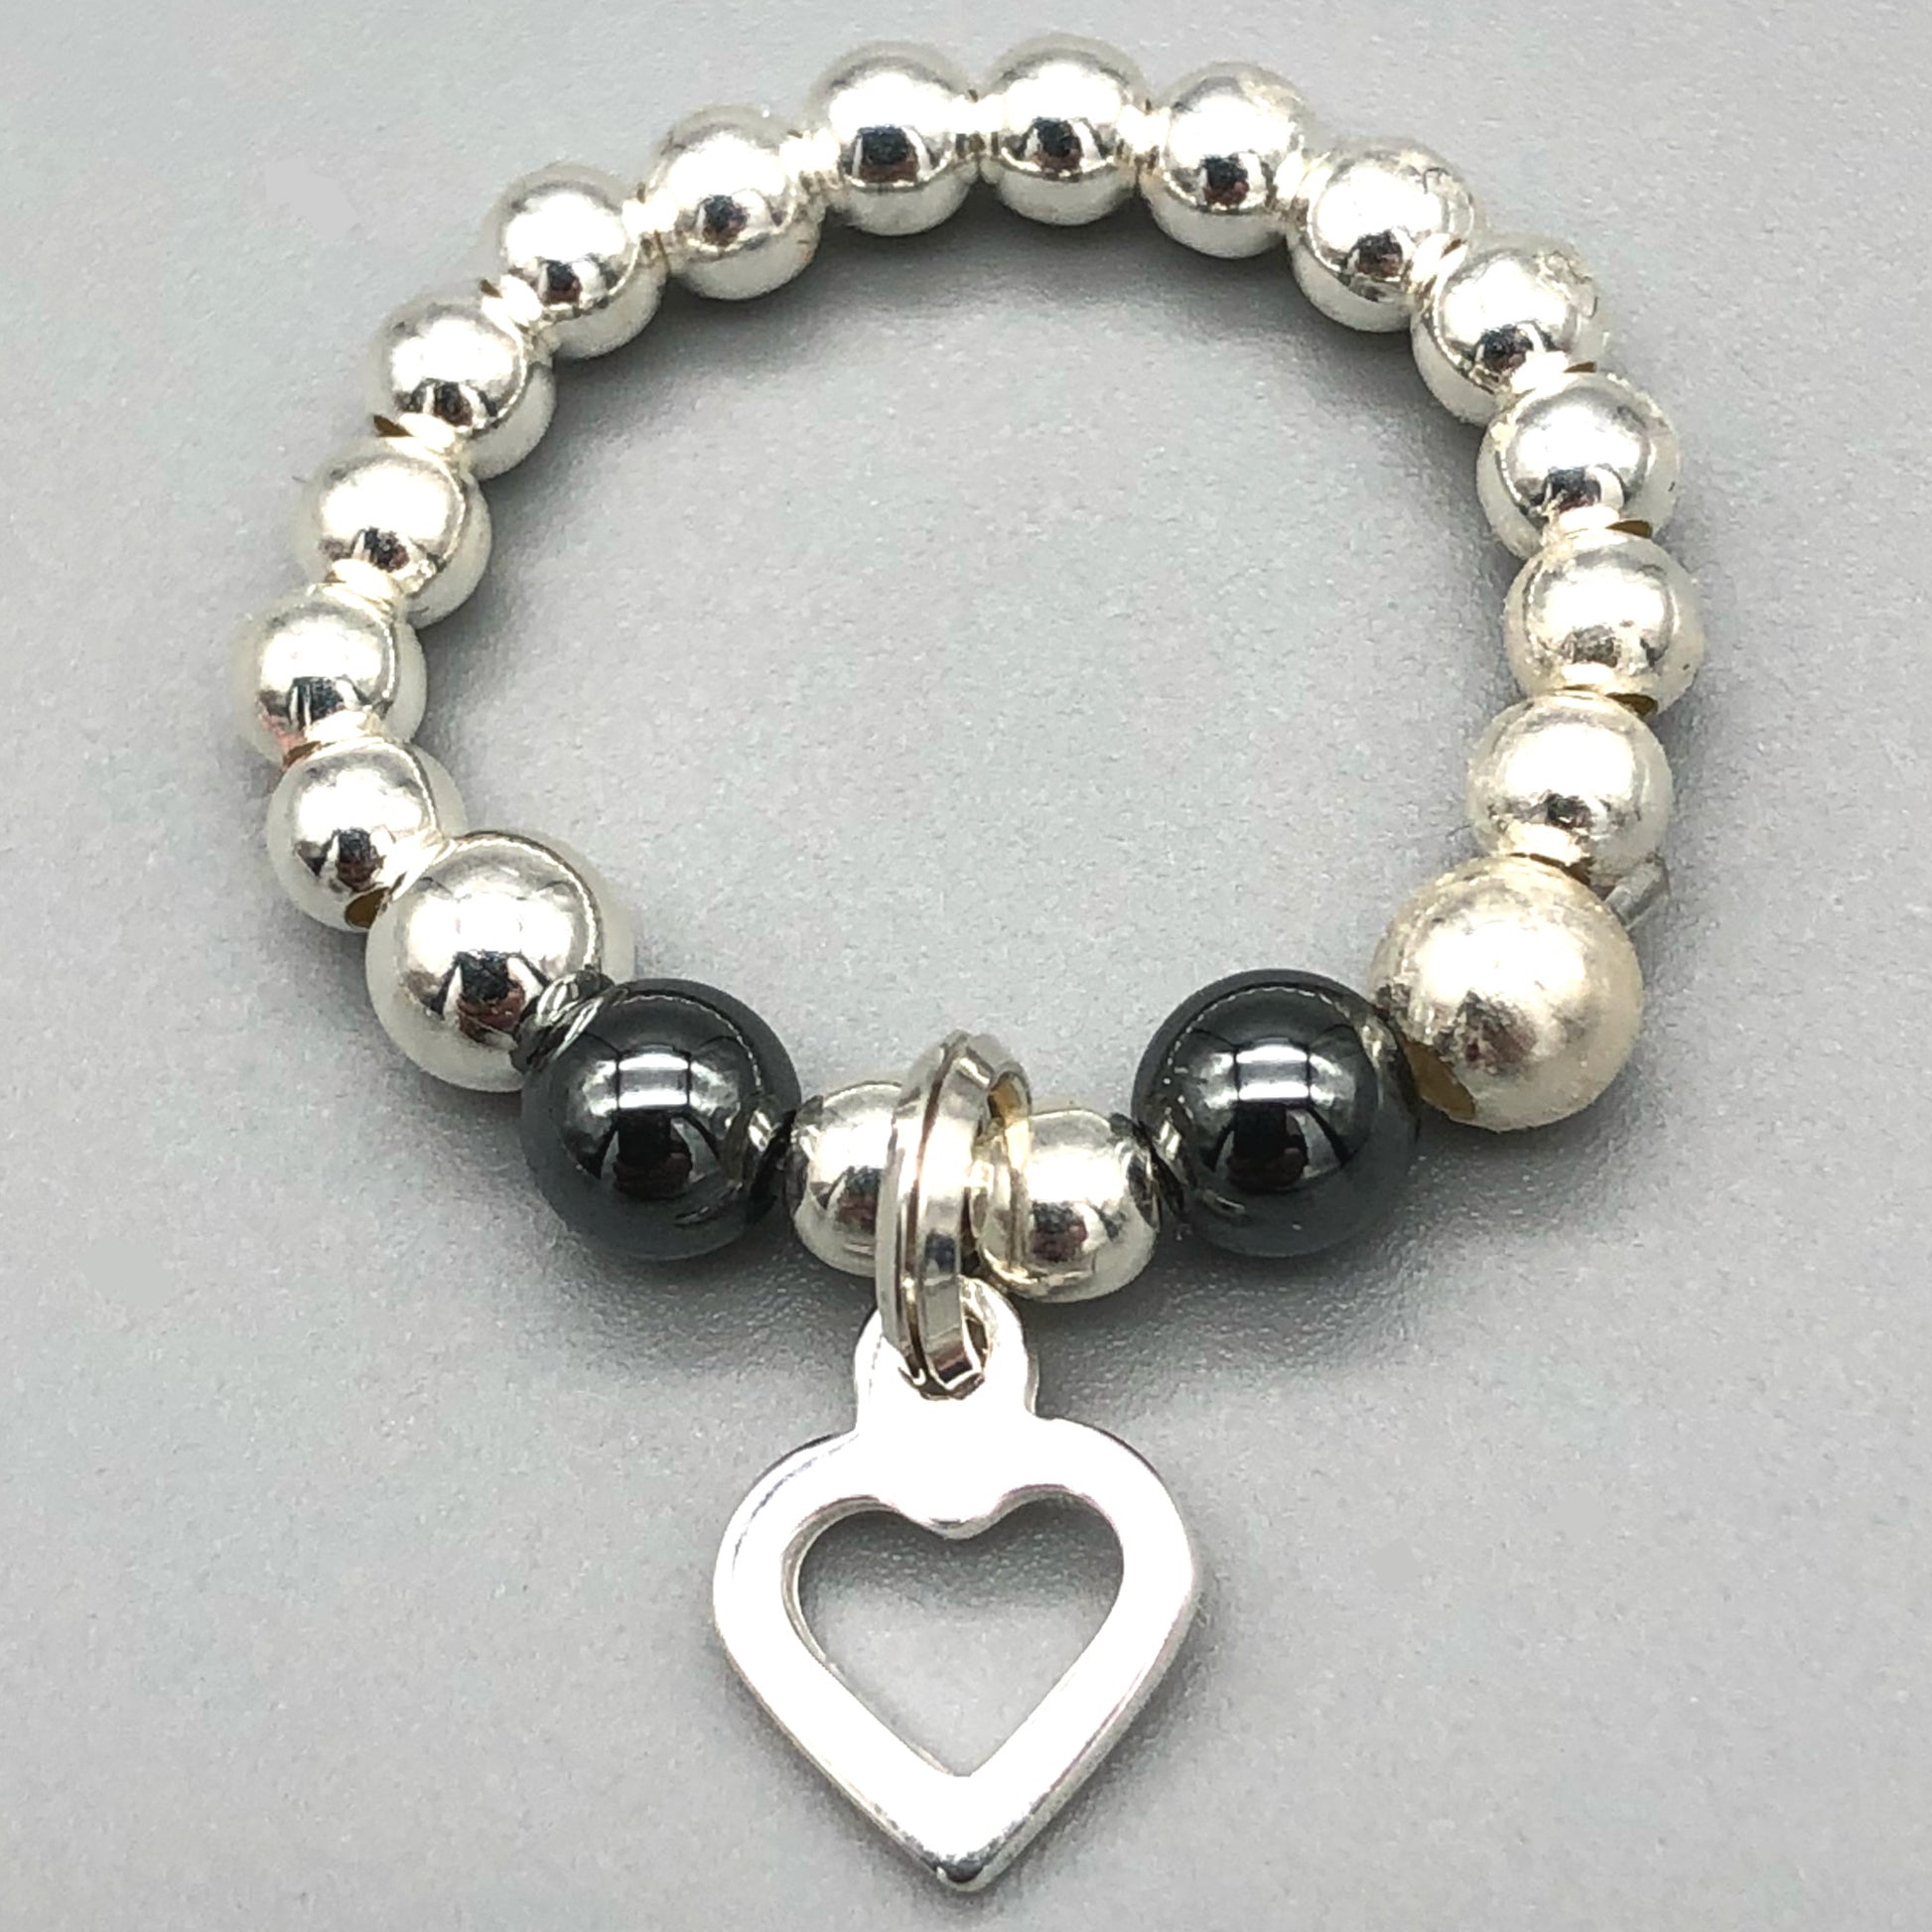 Heart charm hematite & sterling silver beads women's stacking ring by My Silver Wish